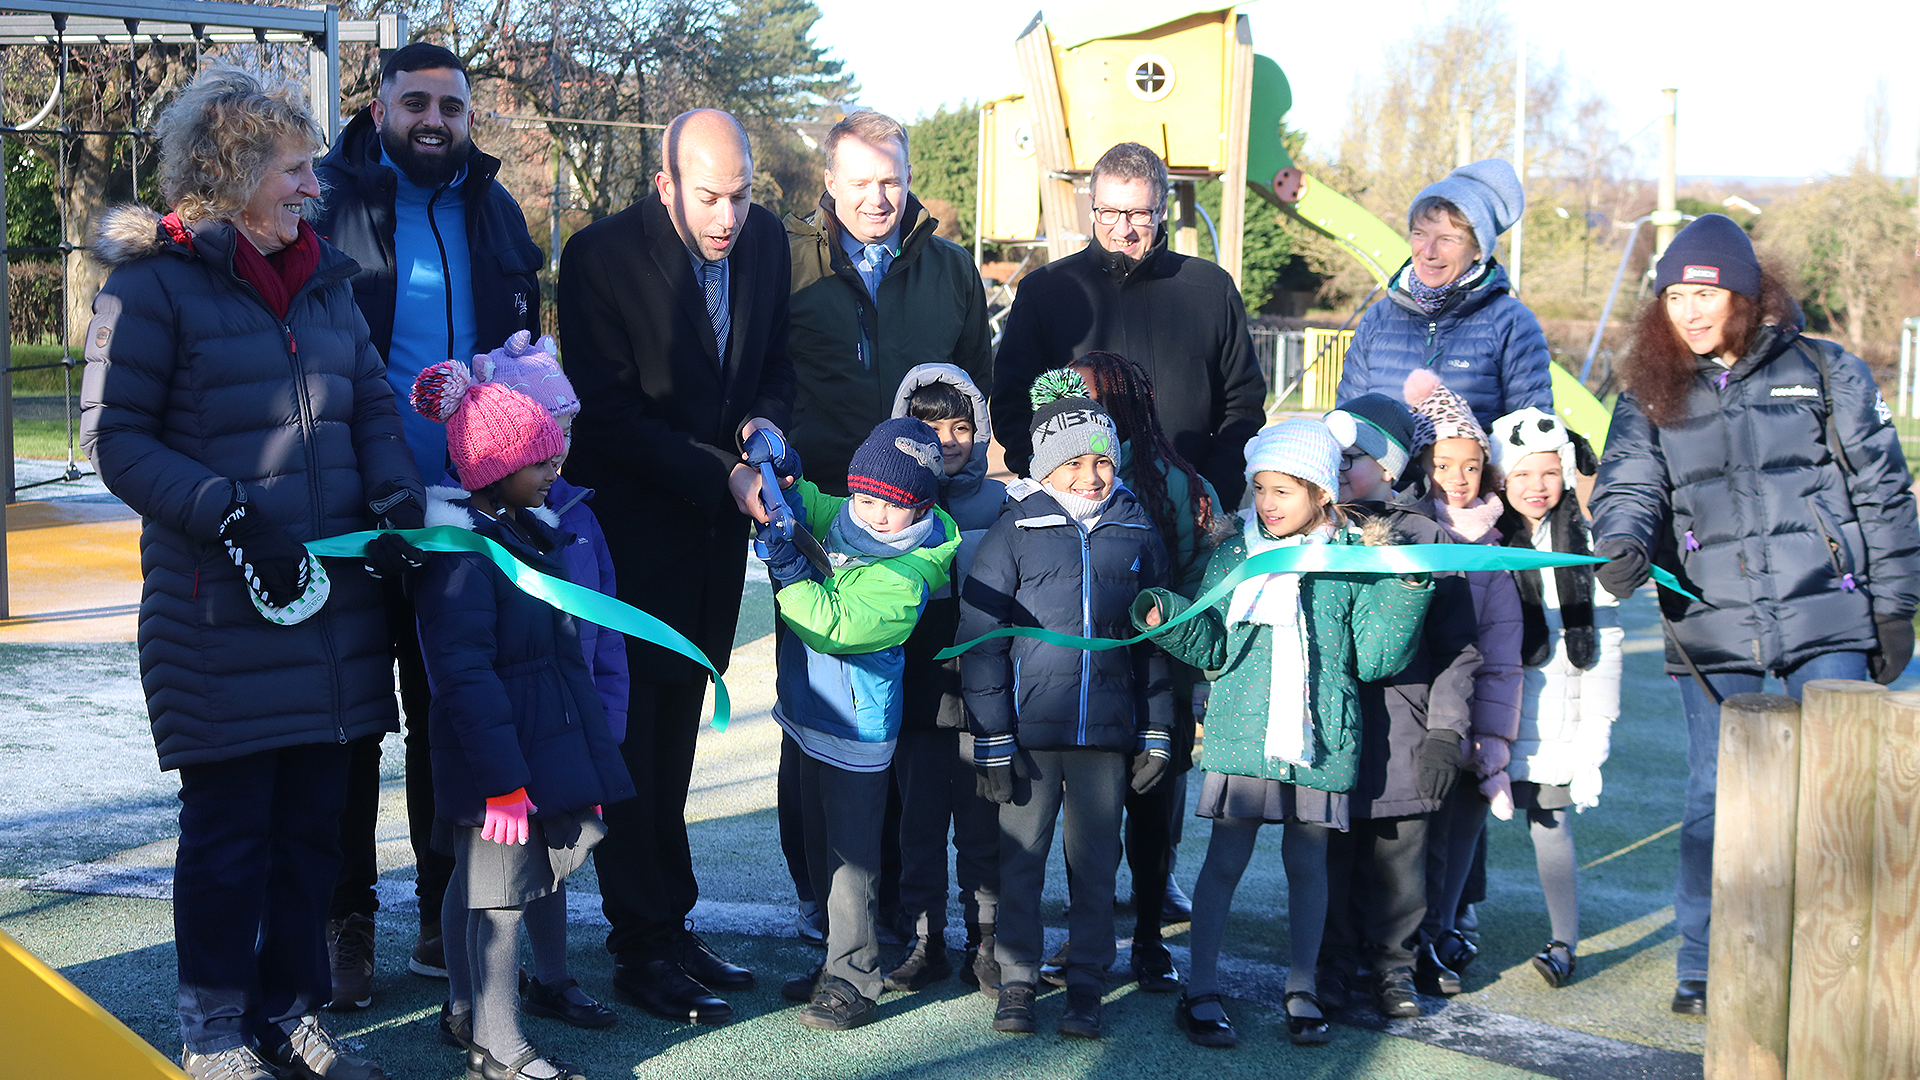 Boundary Road Play Area, West Bridgford was reopened by Councillor Wheeler of Rushcliffe Borough Council